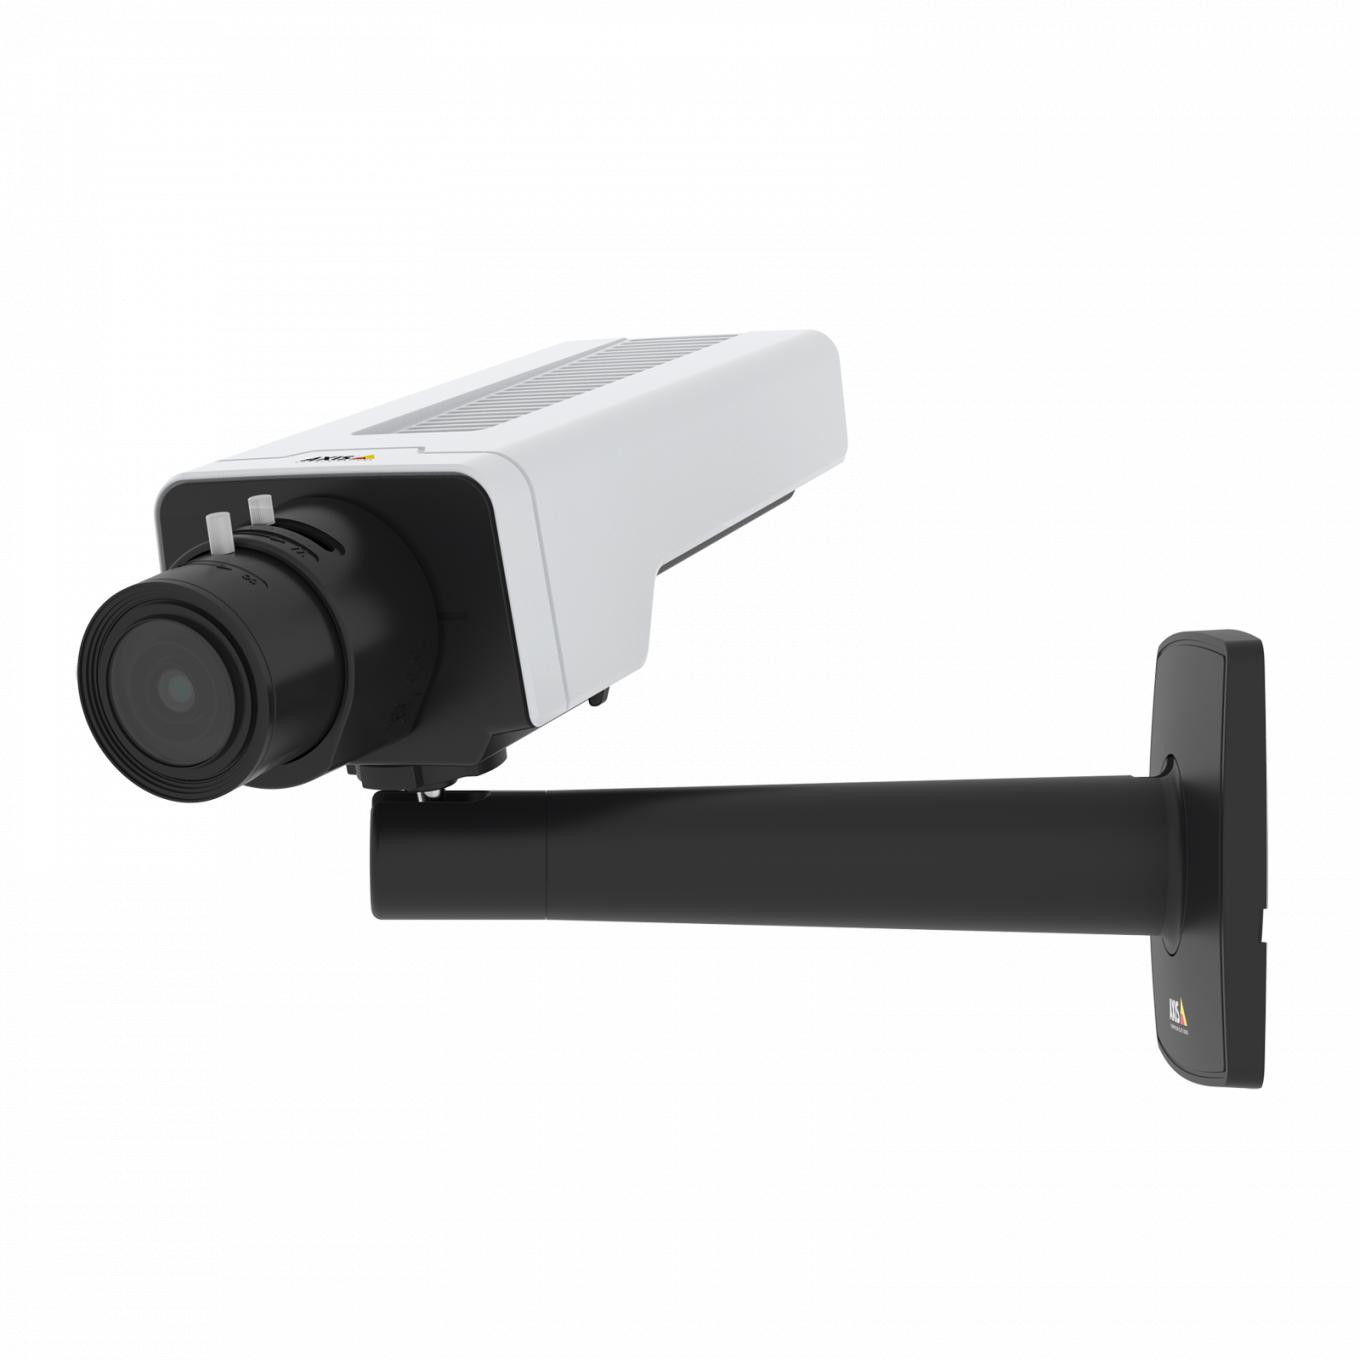 AXIS P1378 Network Camera | Axis Communications